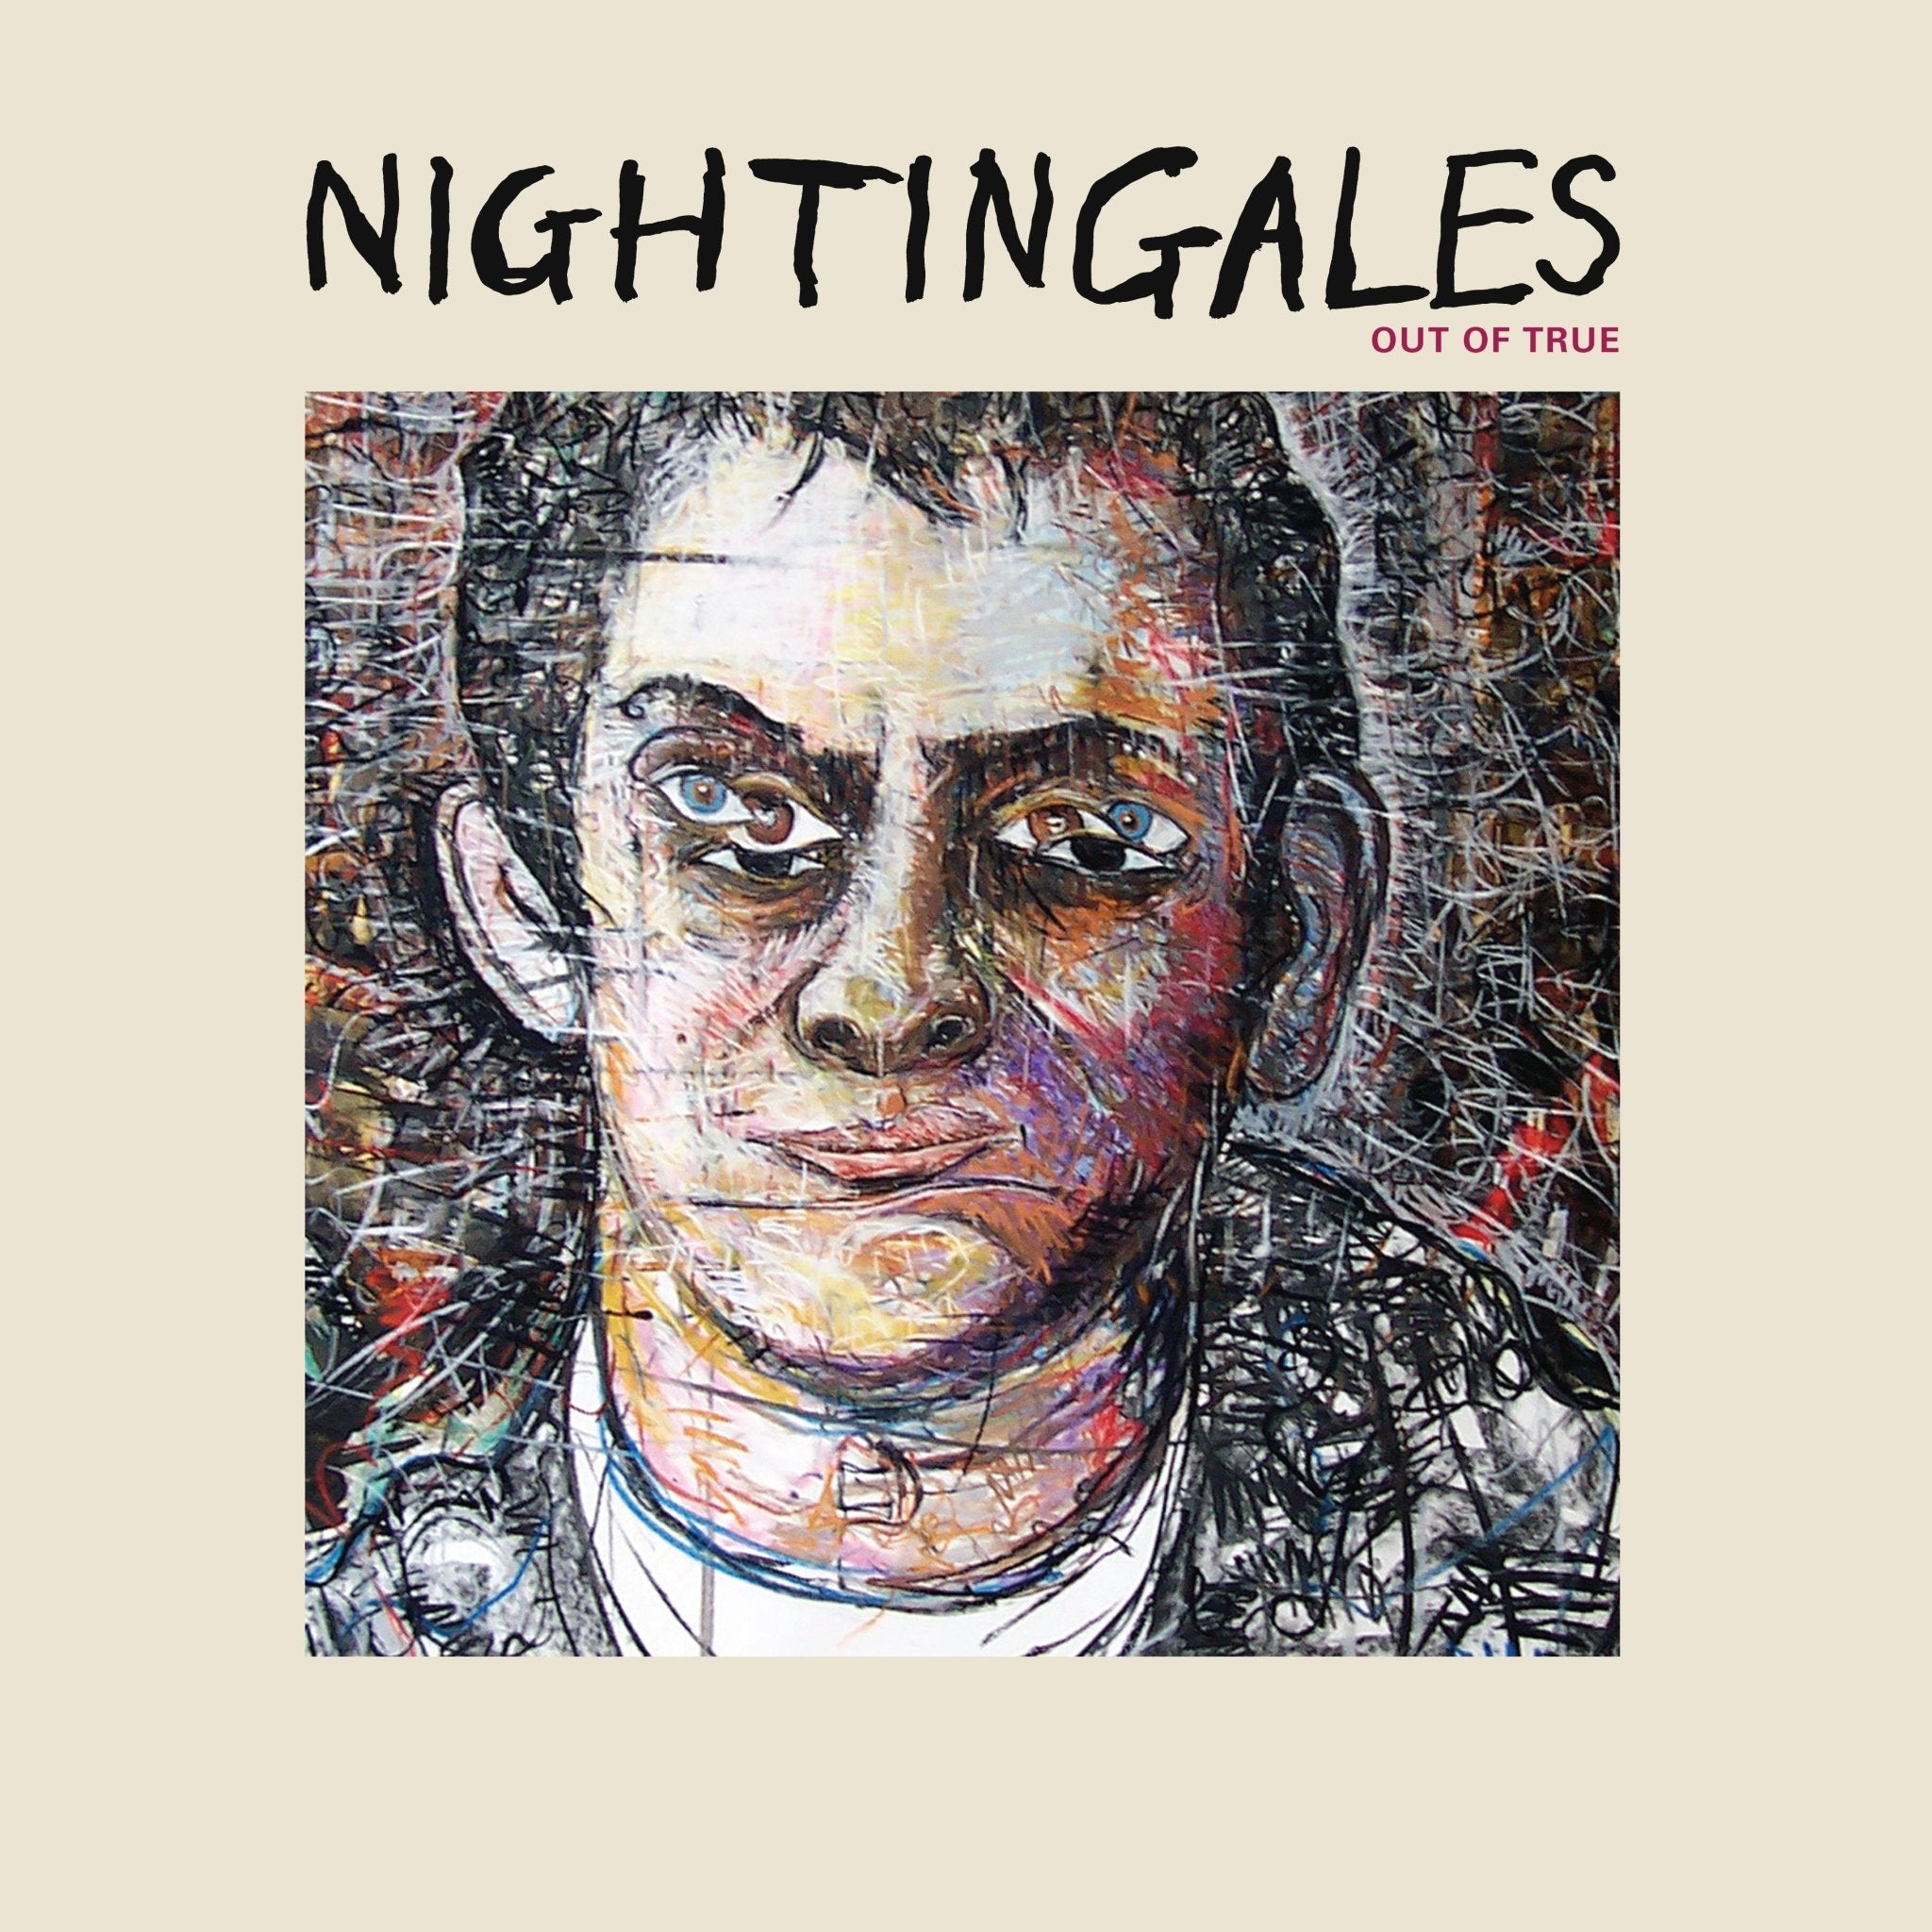 The Nightingales - Out of True - 33RPM